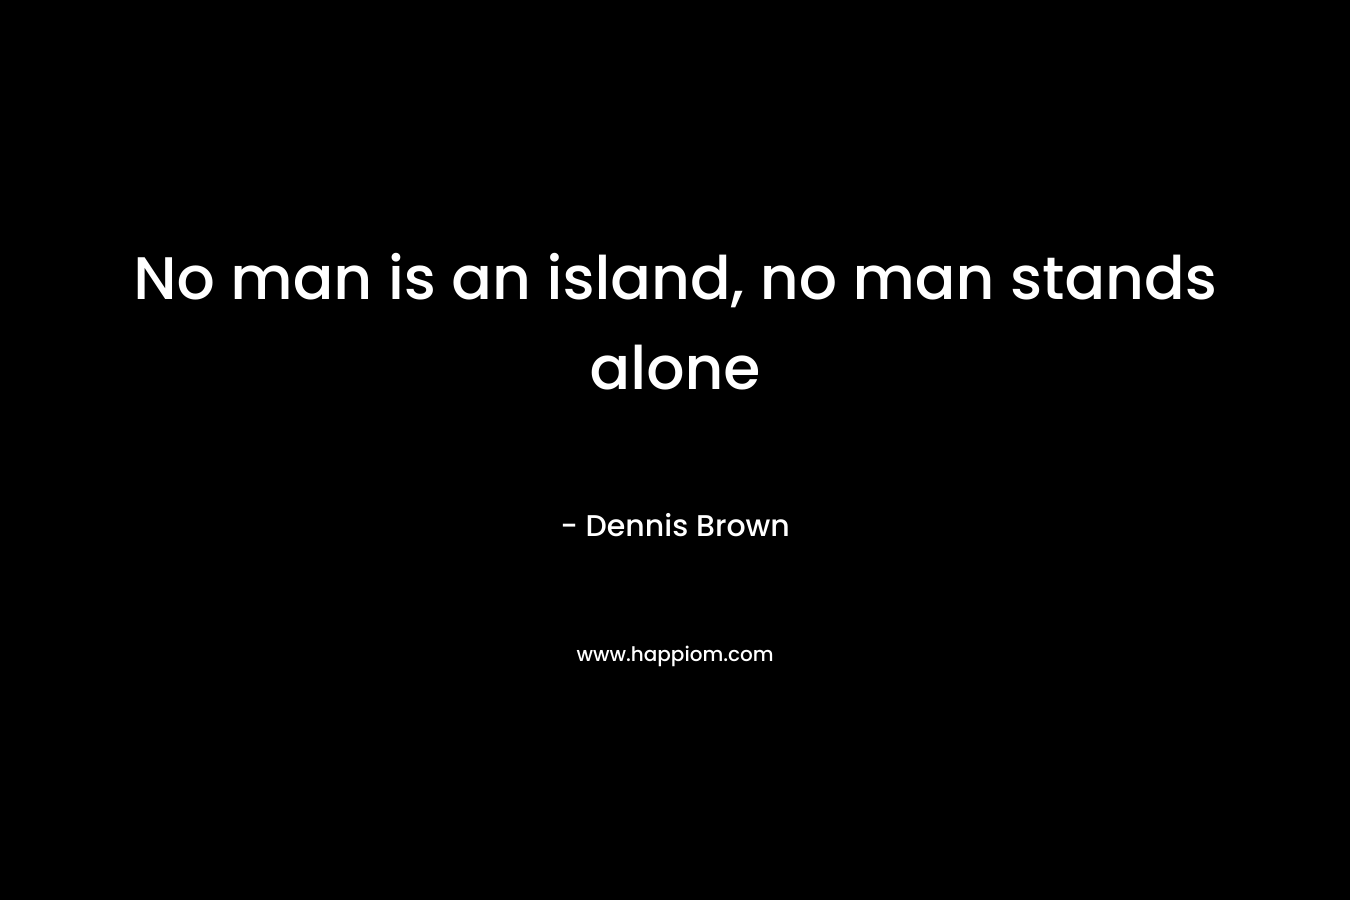 No man is an island, no man stands alone